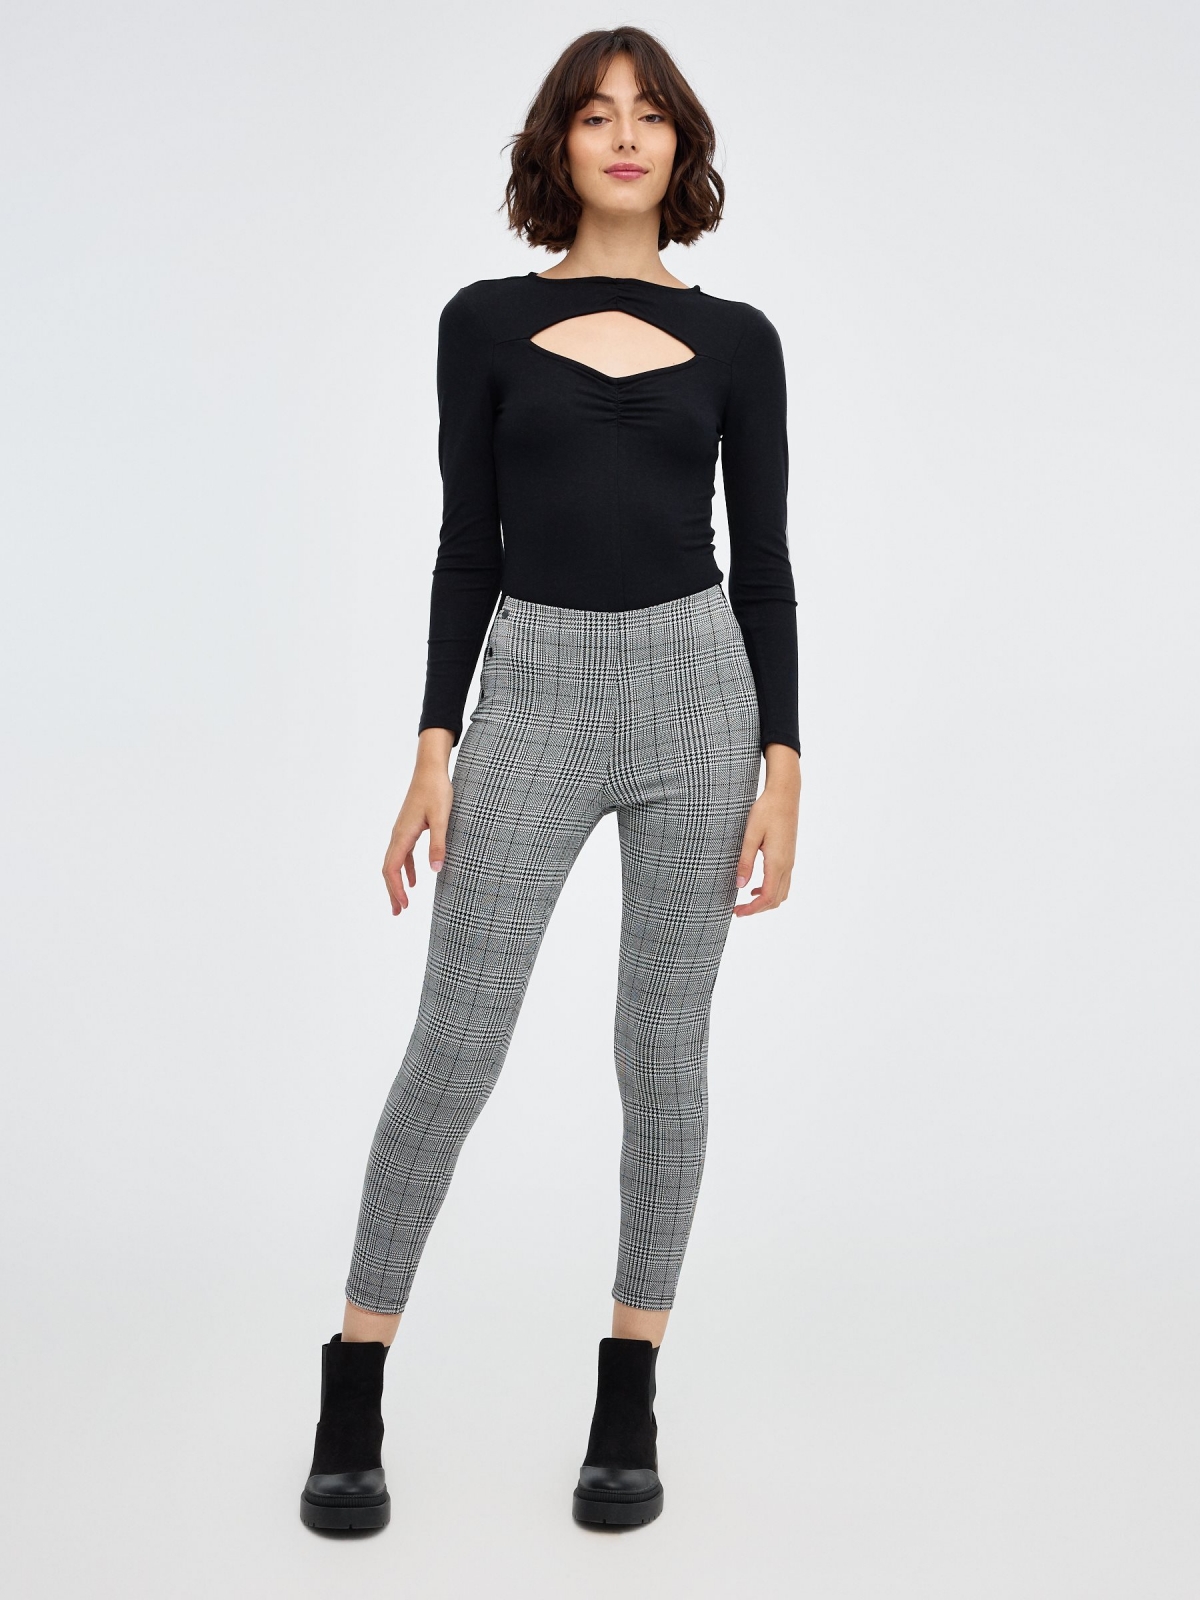 HIGH-WAIST LEGGINGS WITH BUTTONS - Black